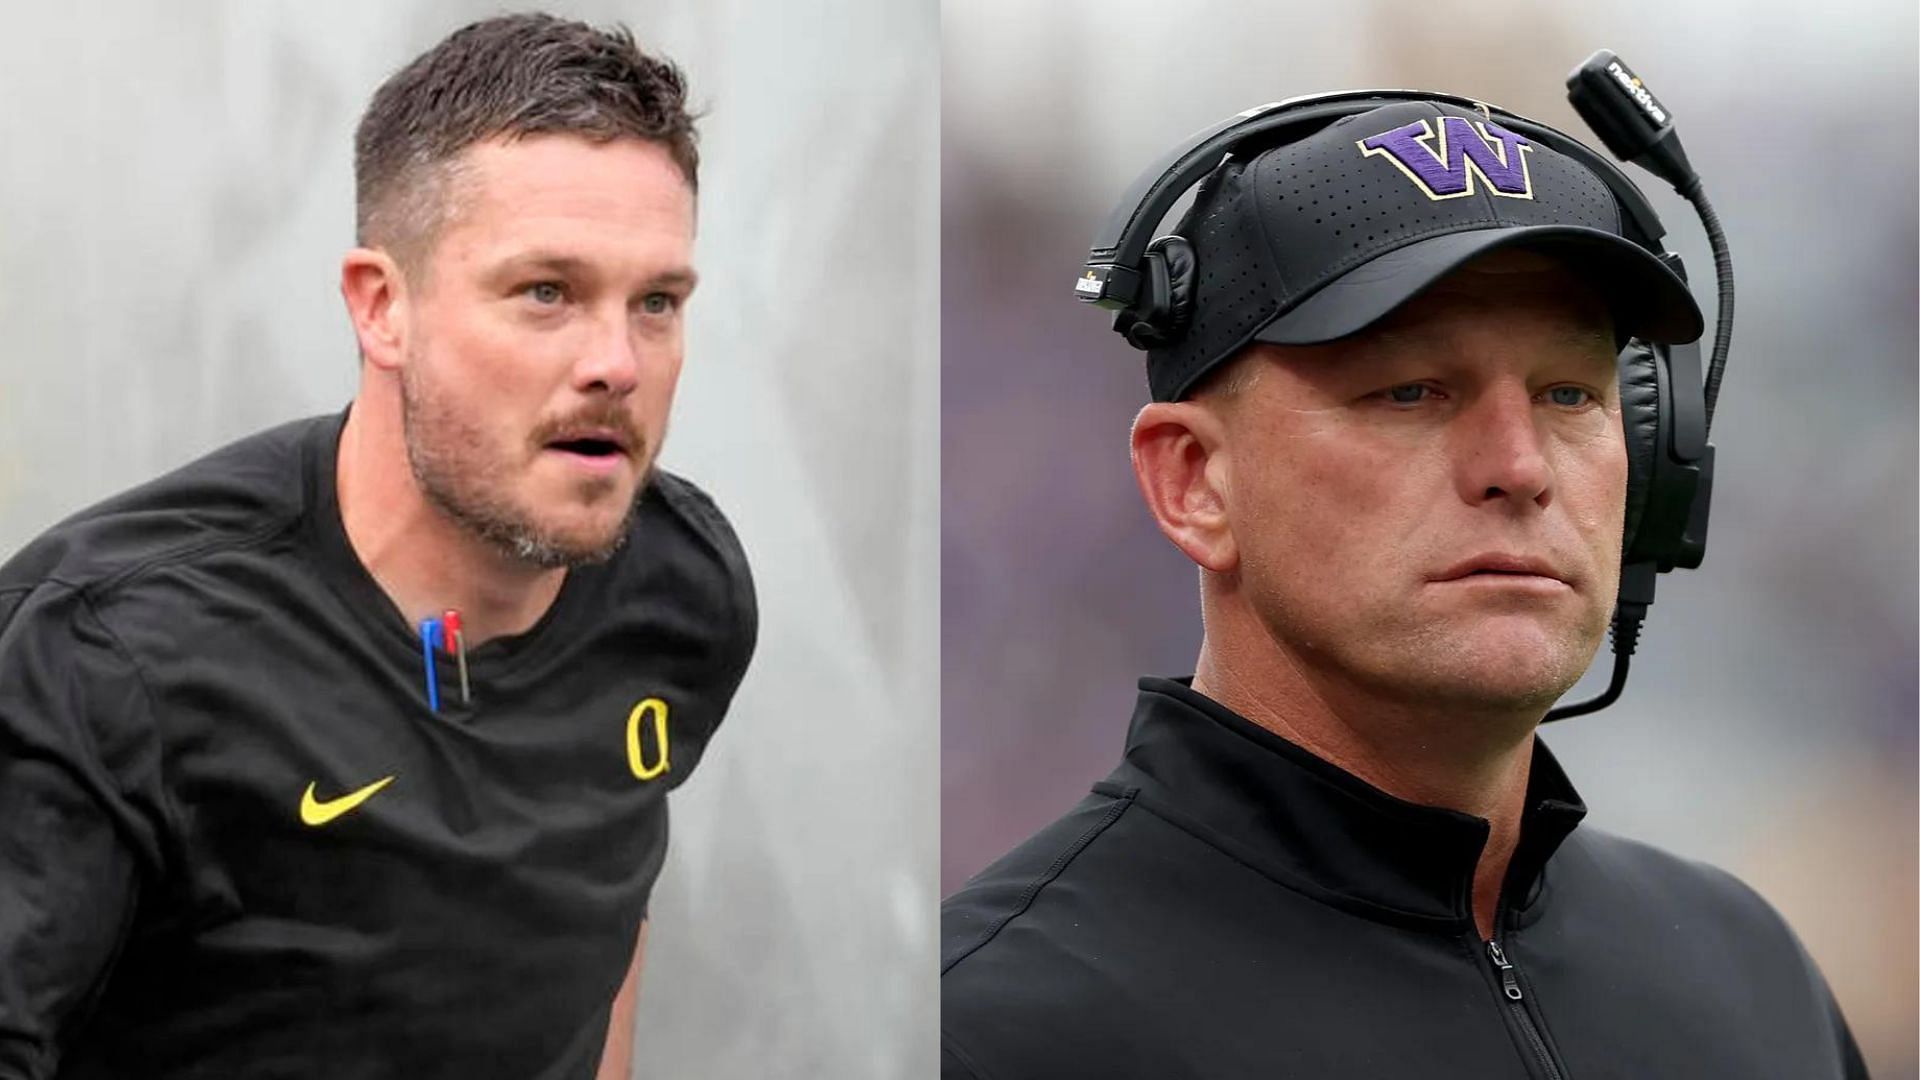 Top 7 Oregon vs. Washington memes as Pac-12 plays its last game after 108 years